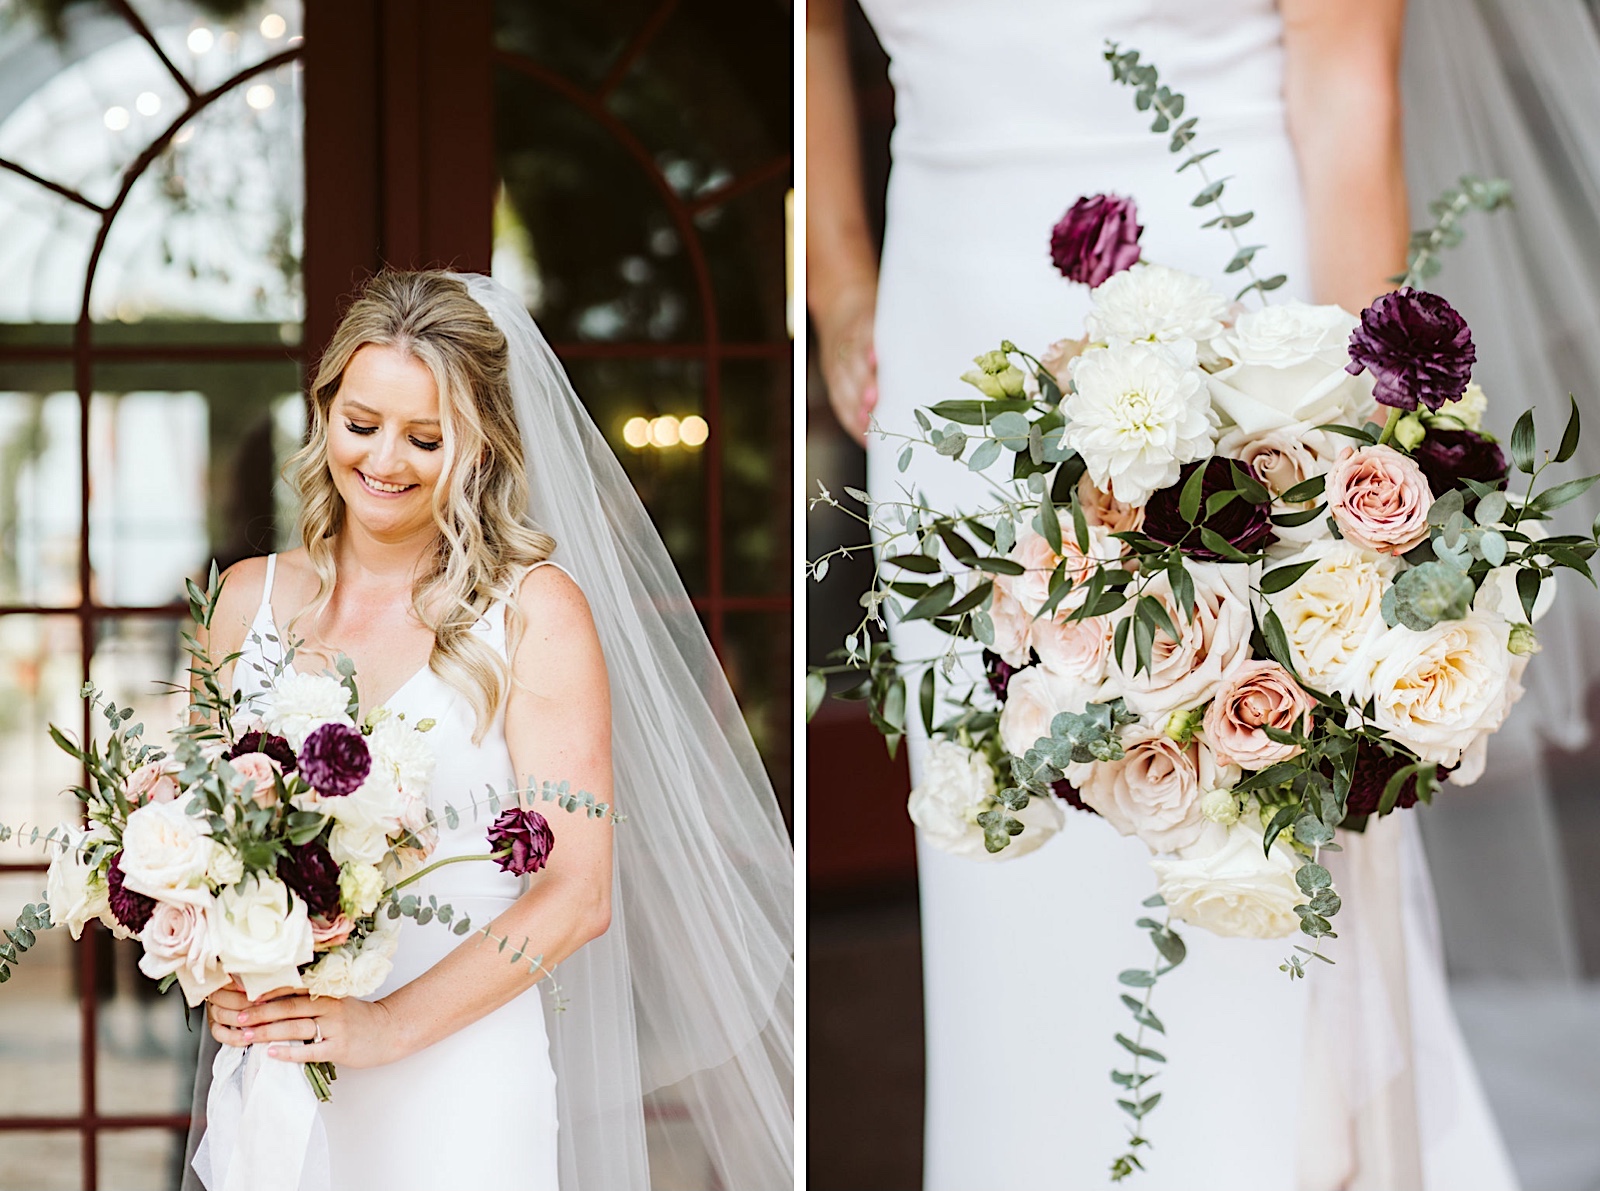 Vibrant Wedding At Siren Song Vineyard: bride portraits with her bouquet